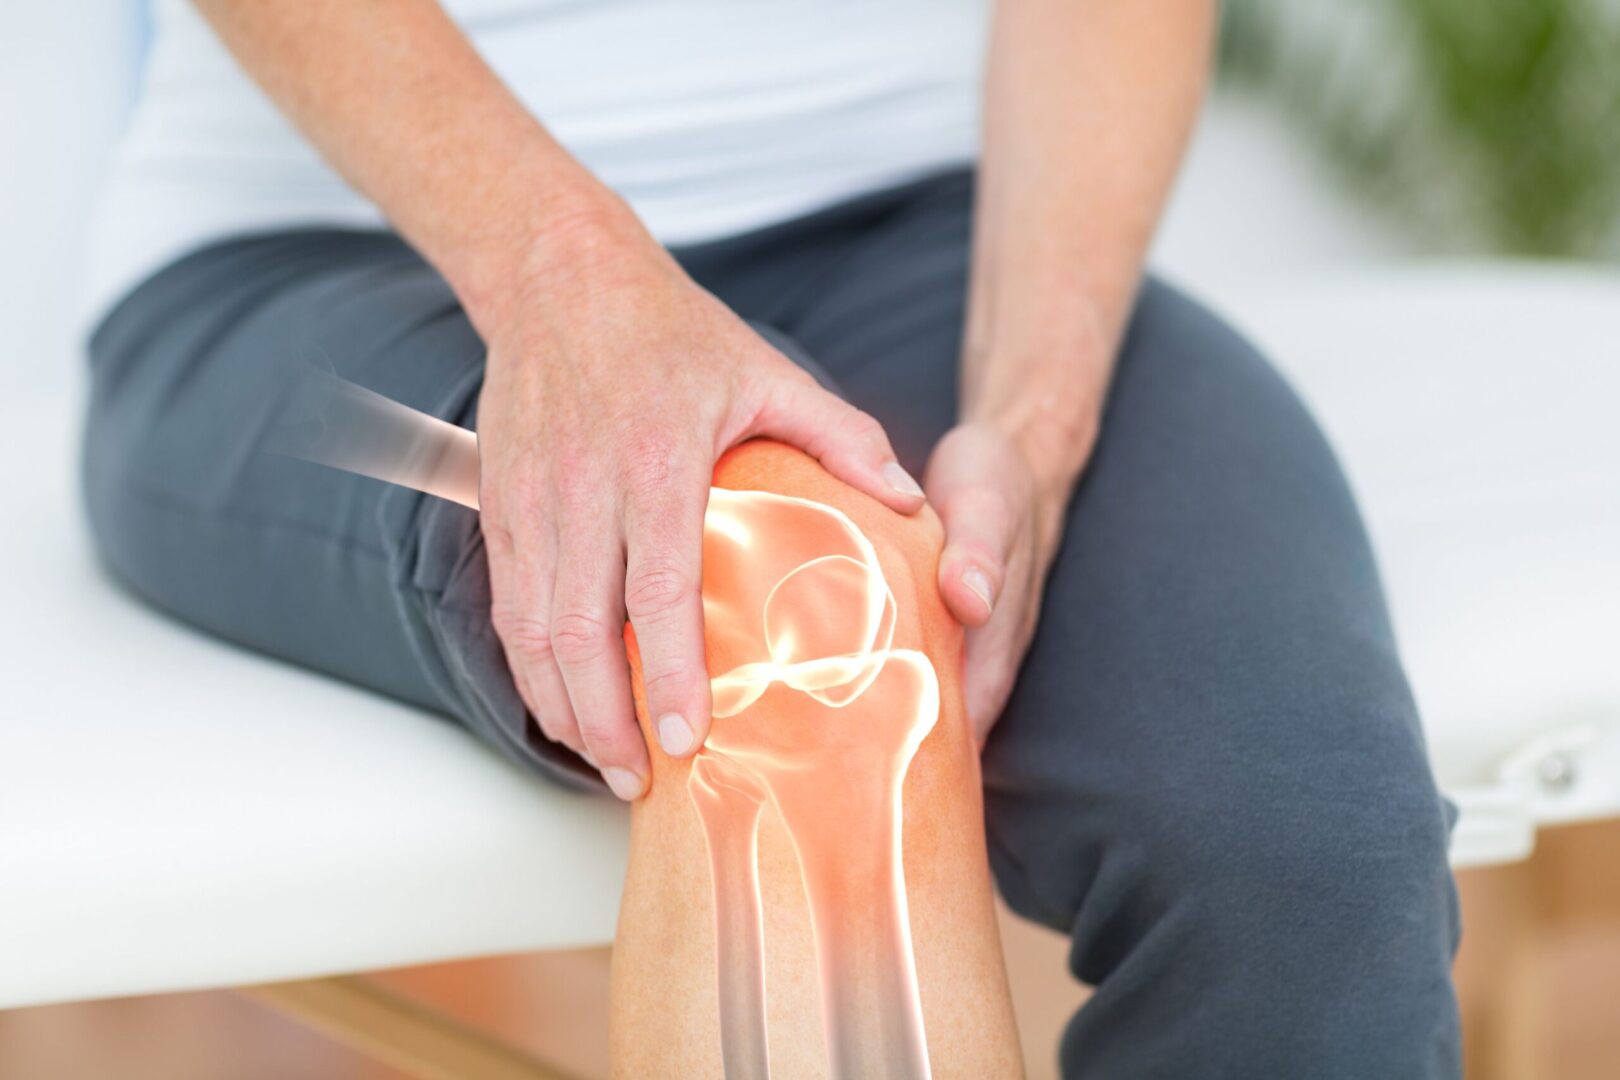 A person holding their knee with the image of an injury.